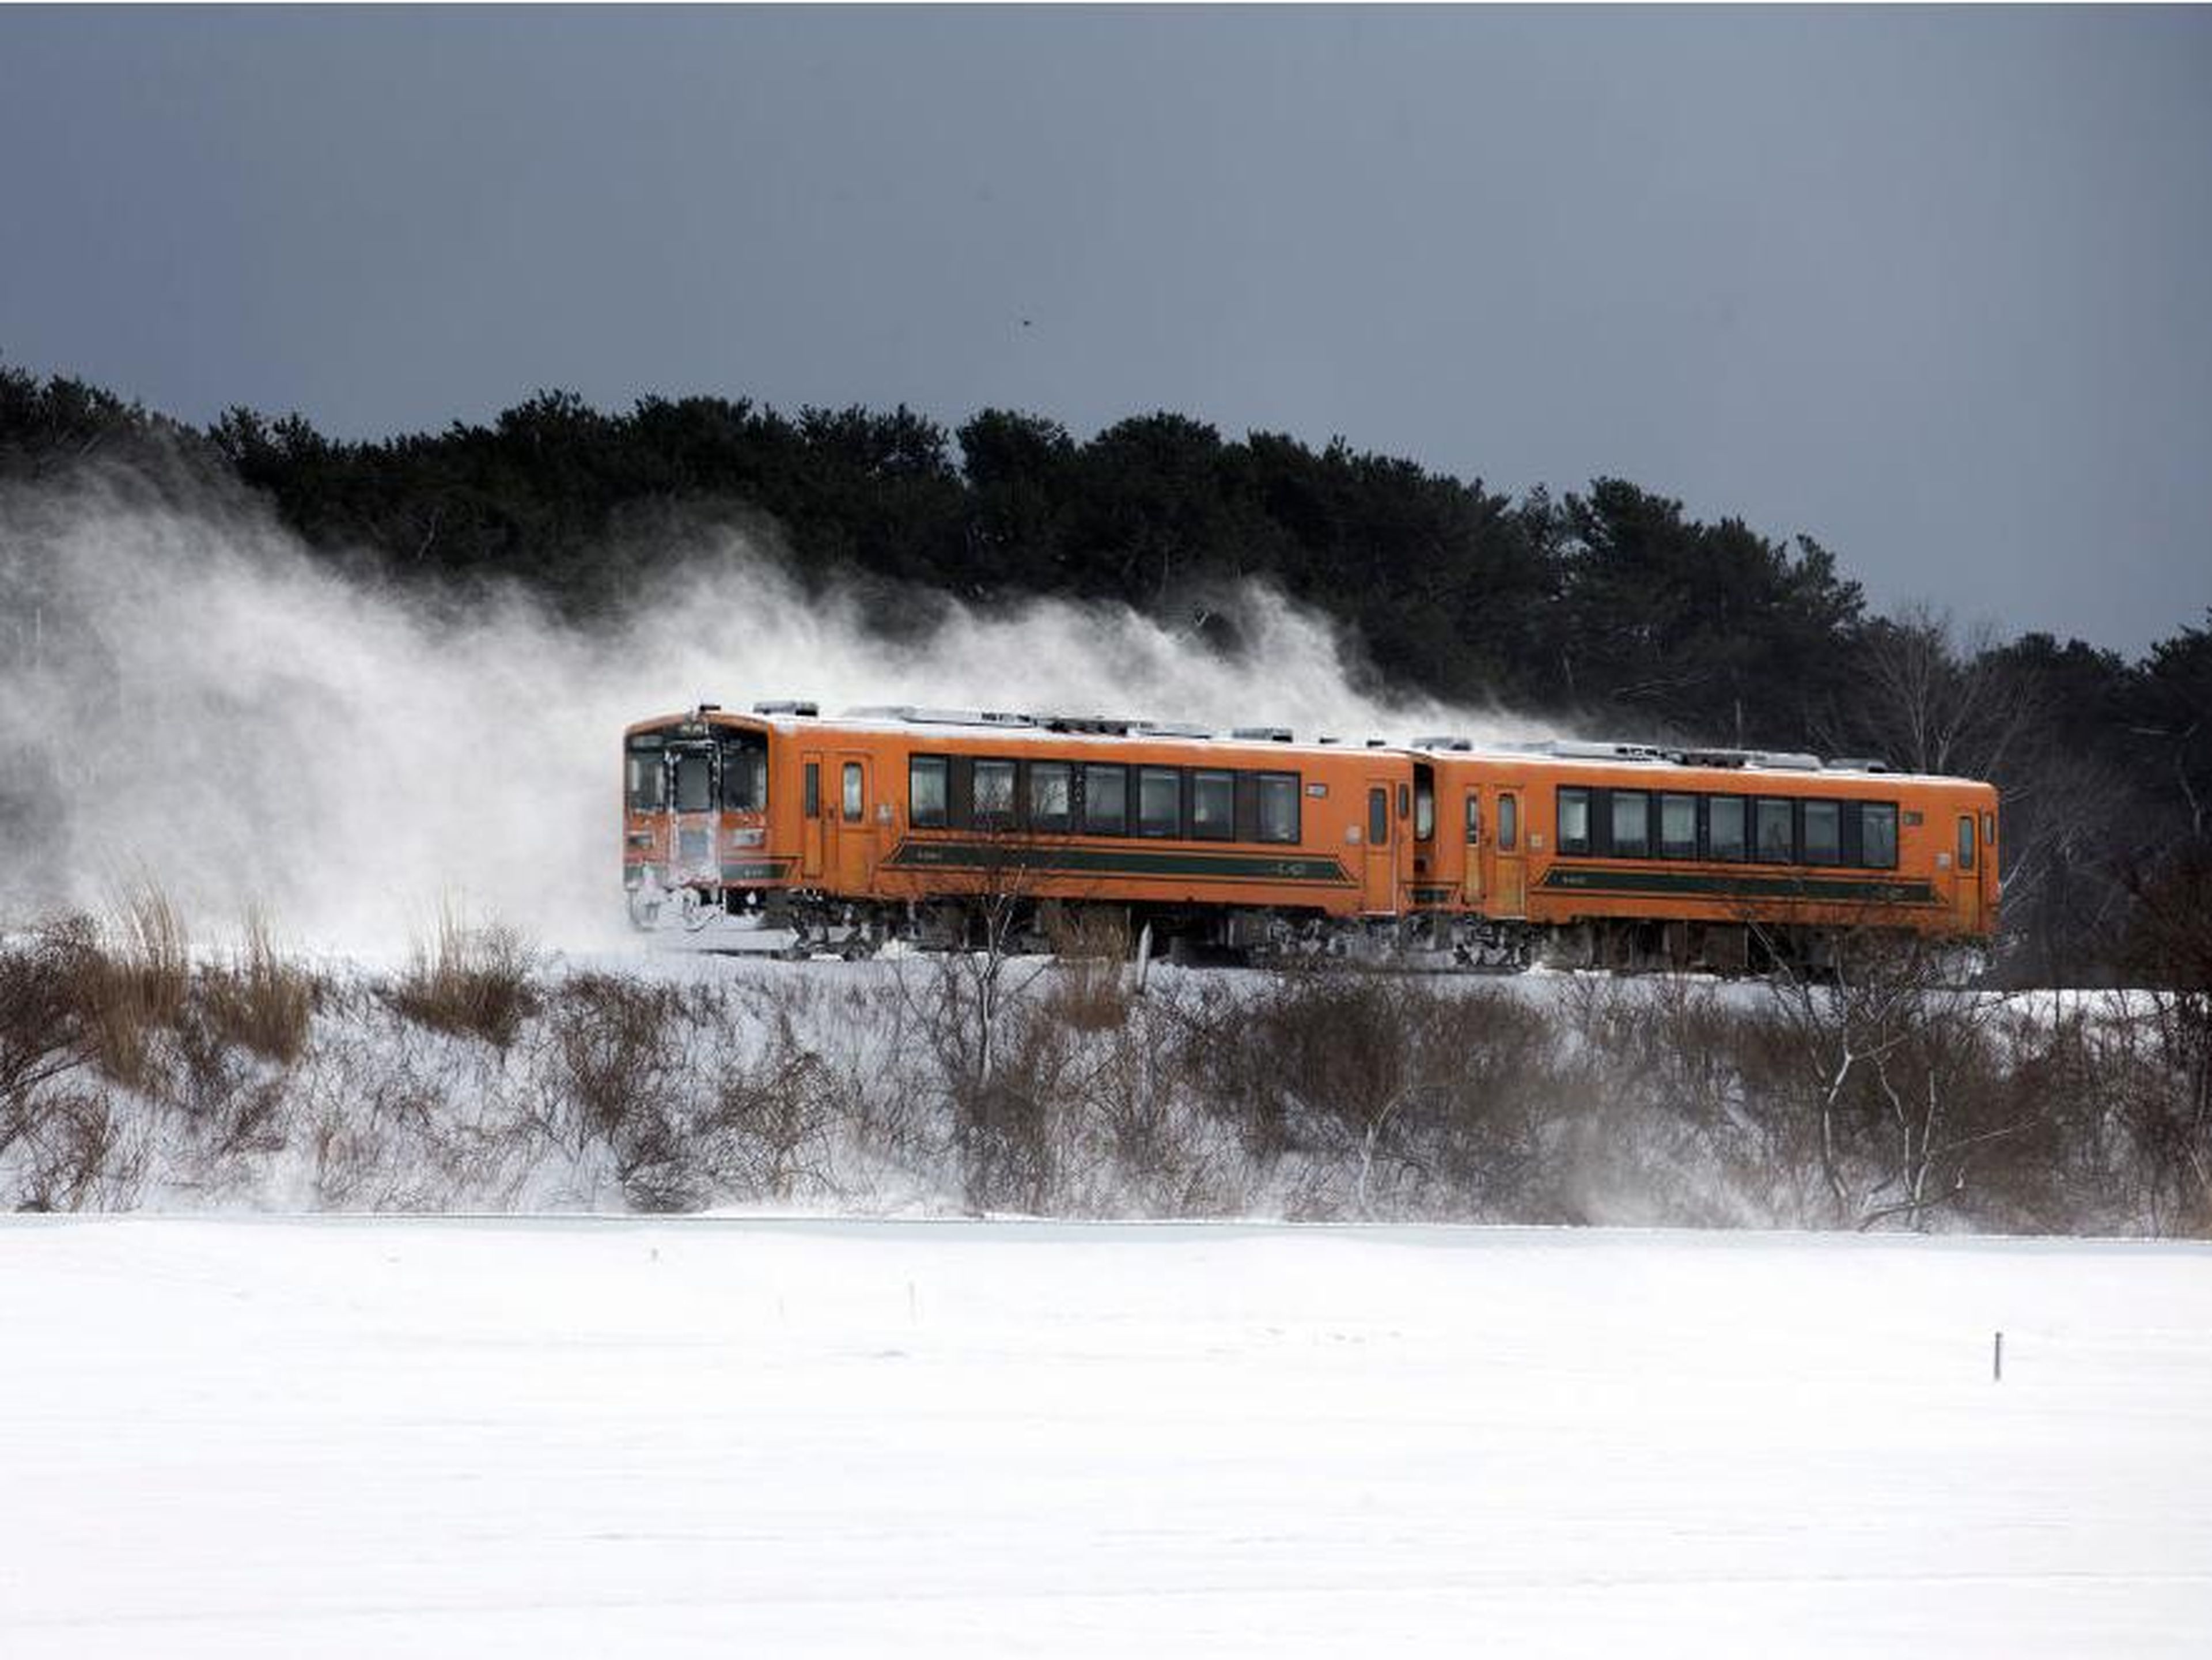 Or if you want to take in the scenic view of the snowy countryside, you can travel nostalgically on a potbelly train — aptly named for the potbelly stove that heats up its passenger cars.